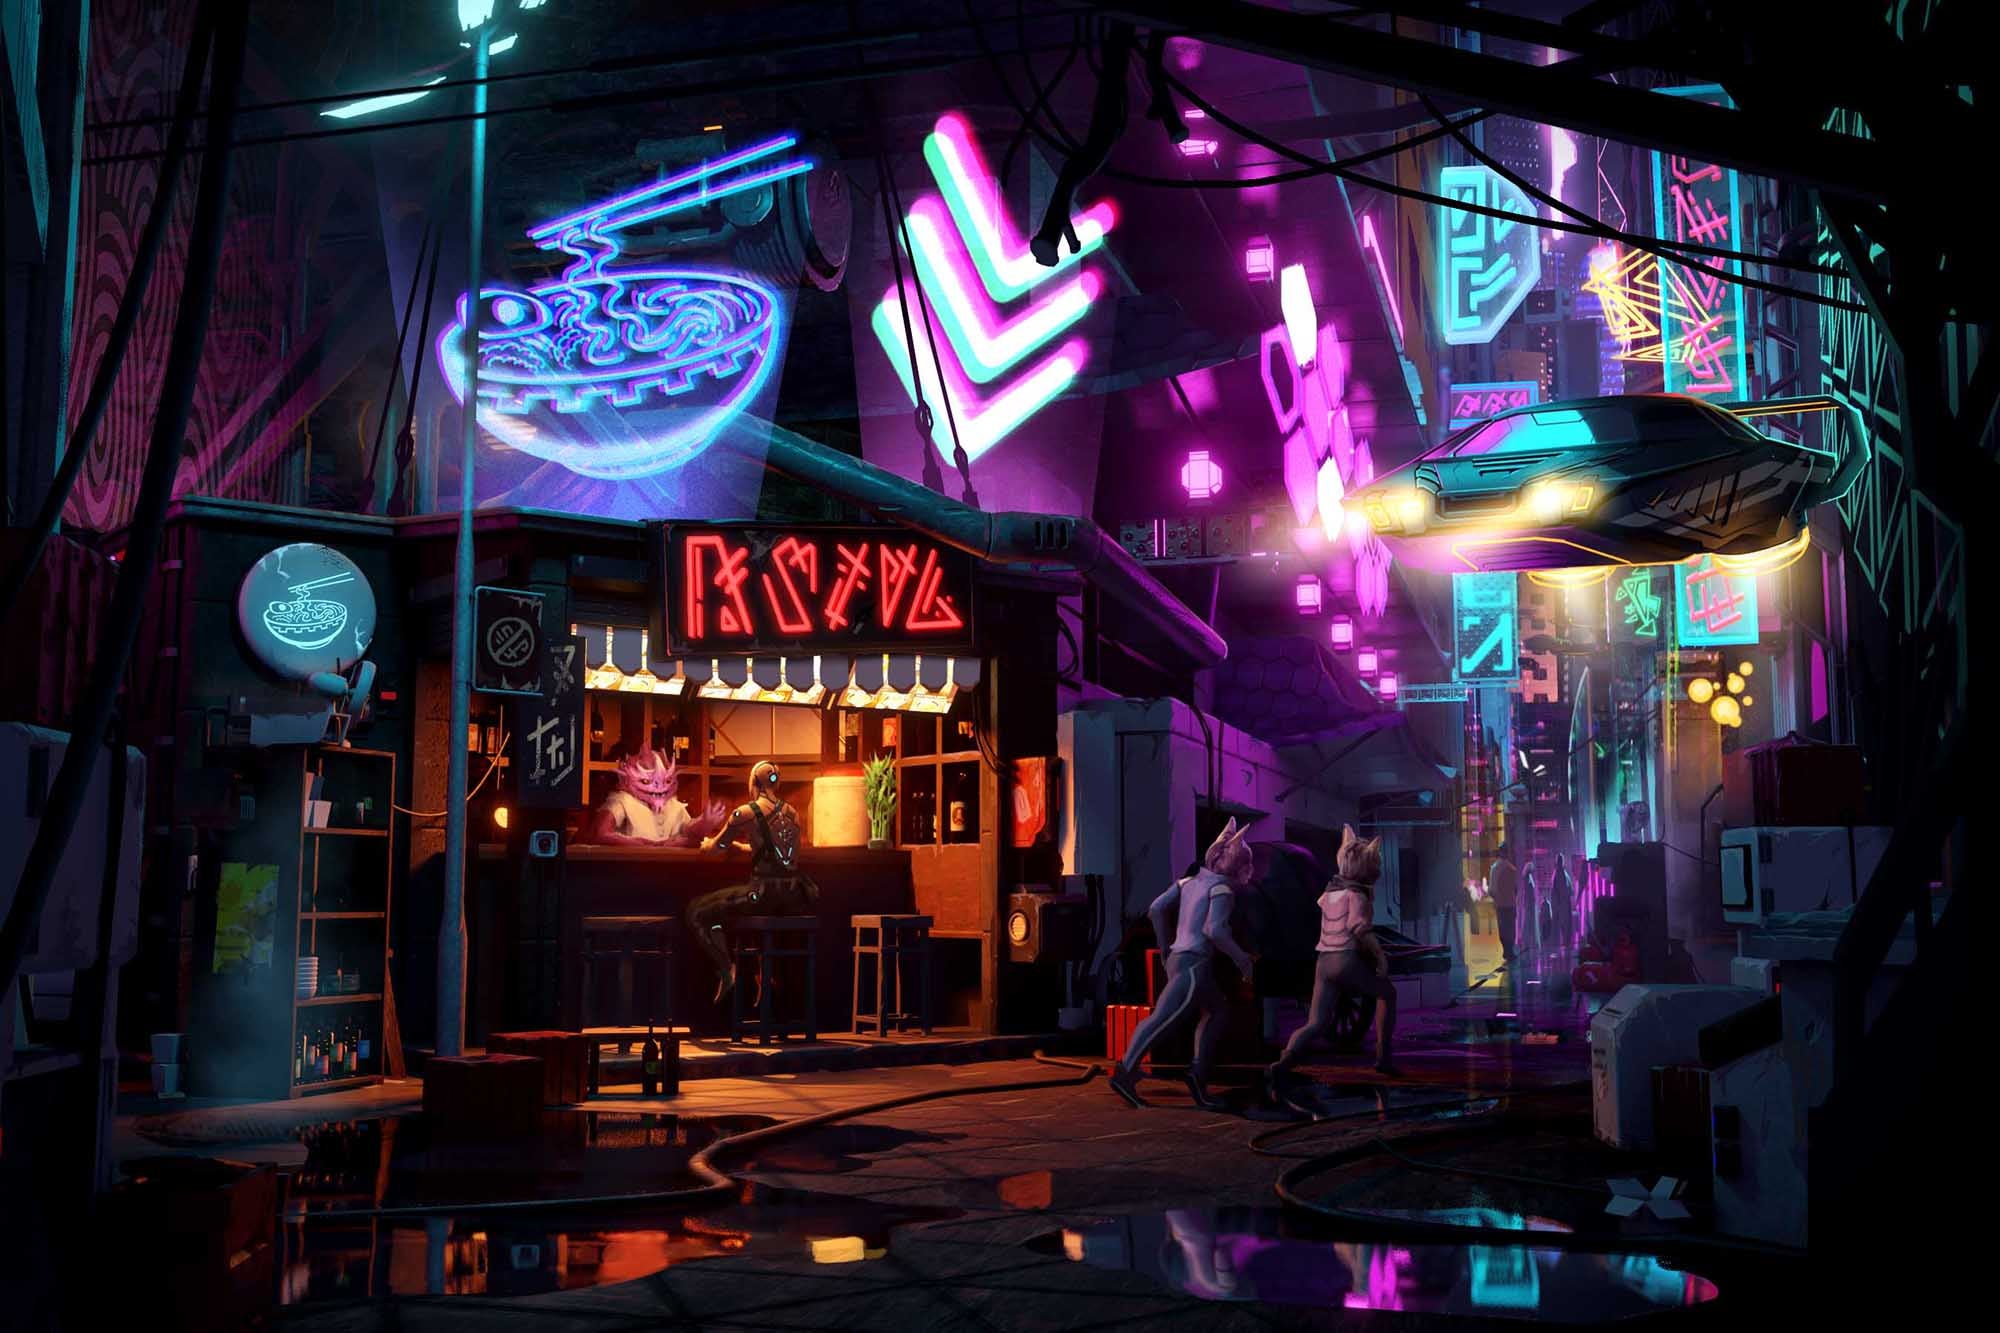 In a gritty, neon light-lit urban setting, a skittermander serves a bowl of noodles to a customer in an unassuming hole-in-the-wall diner.